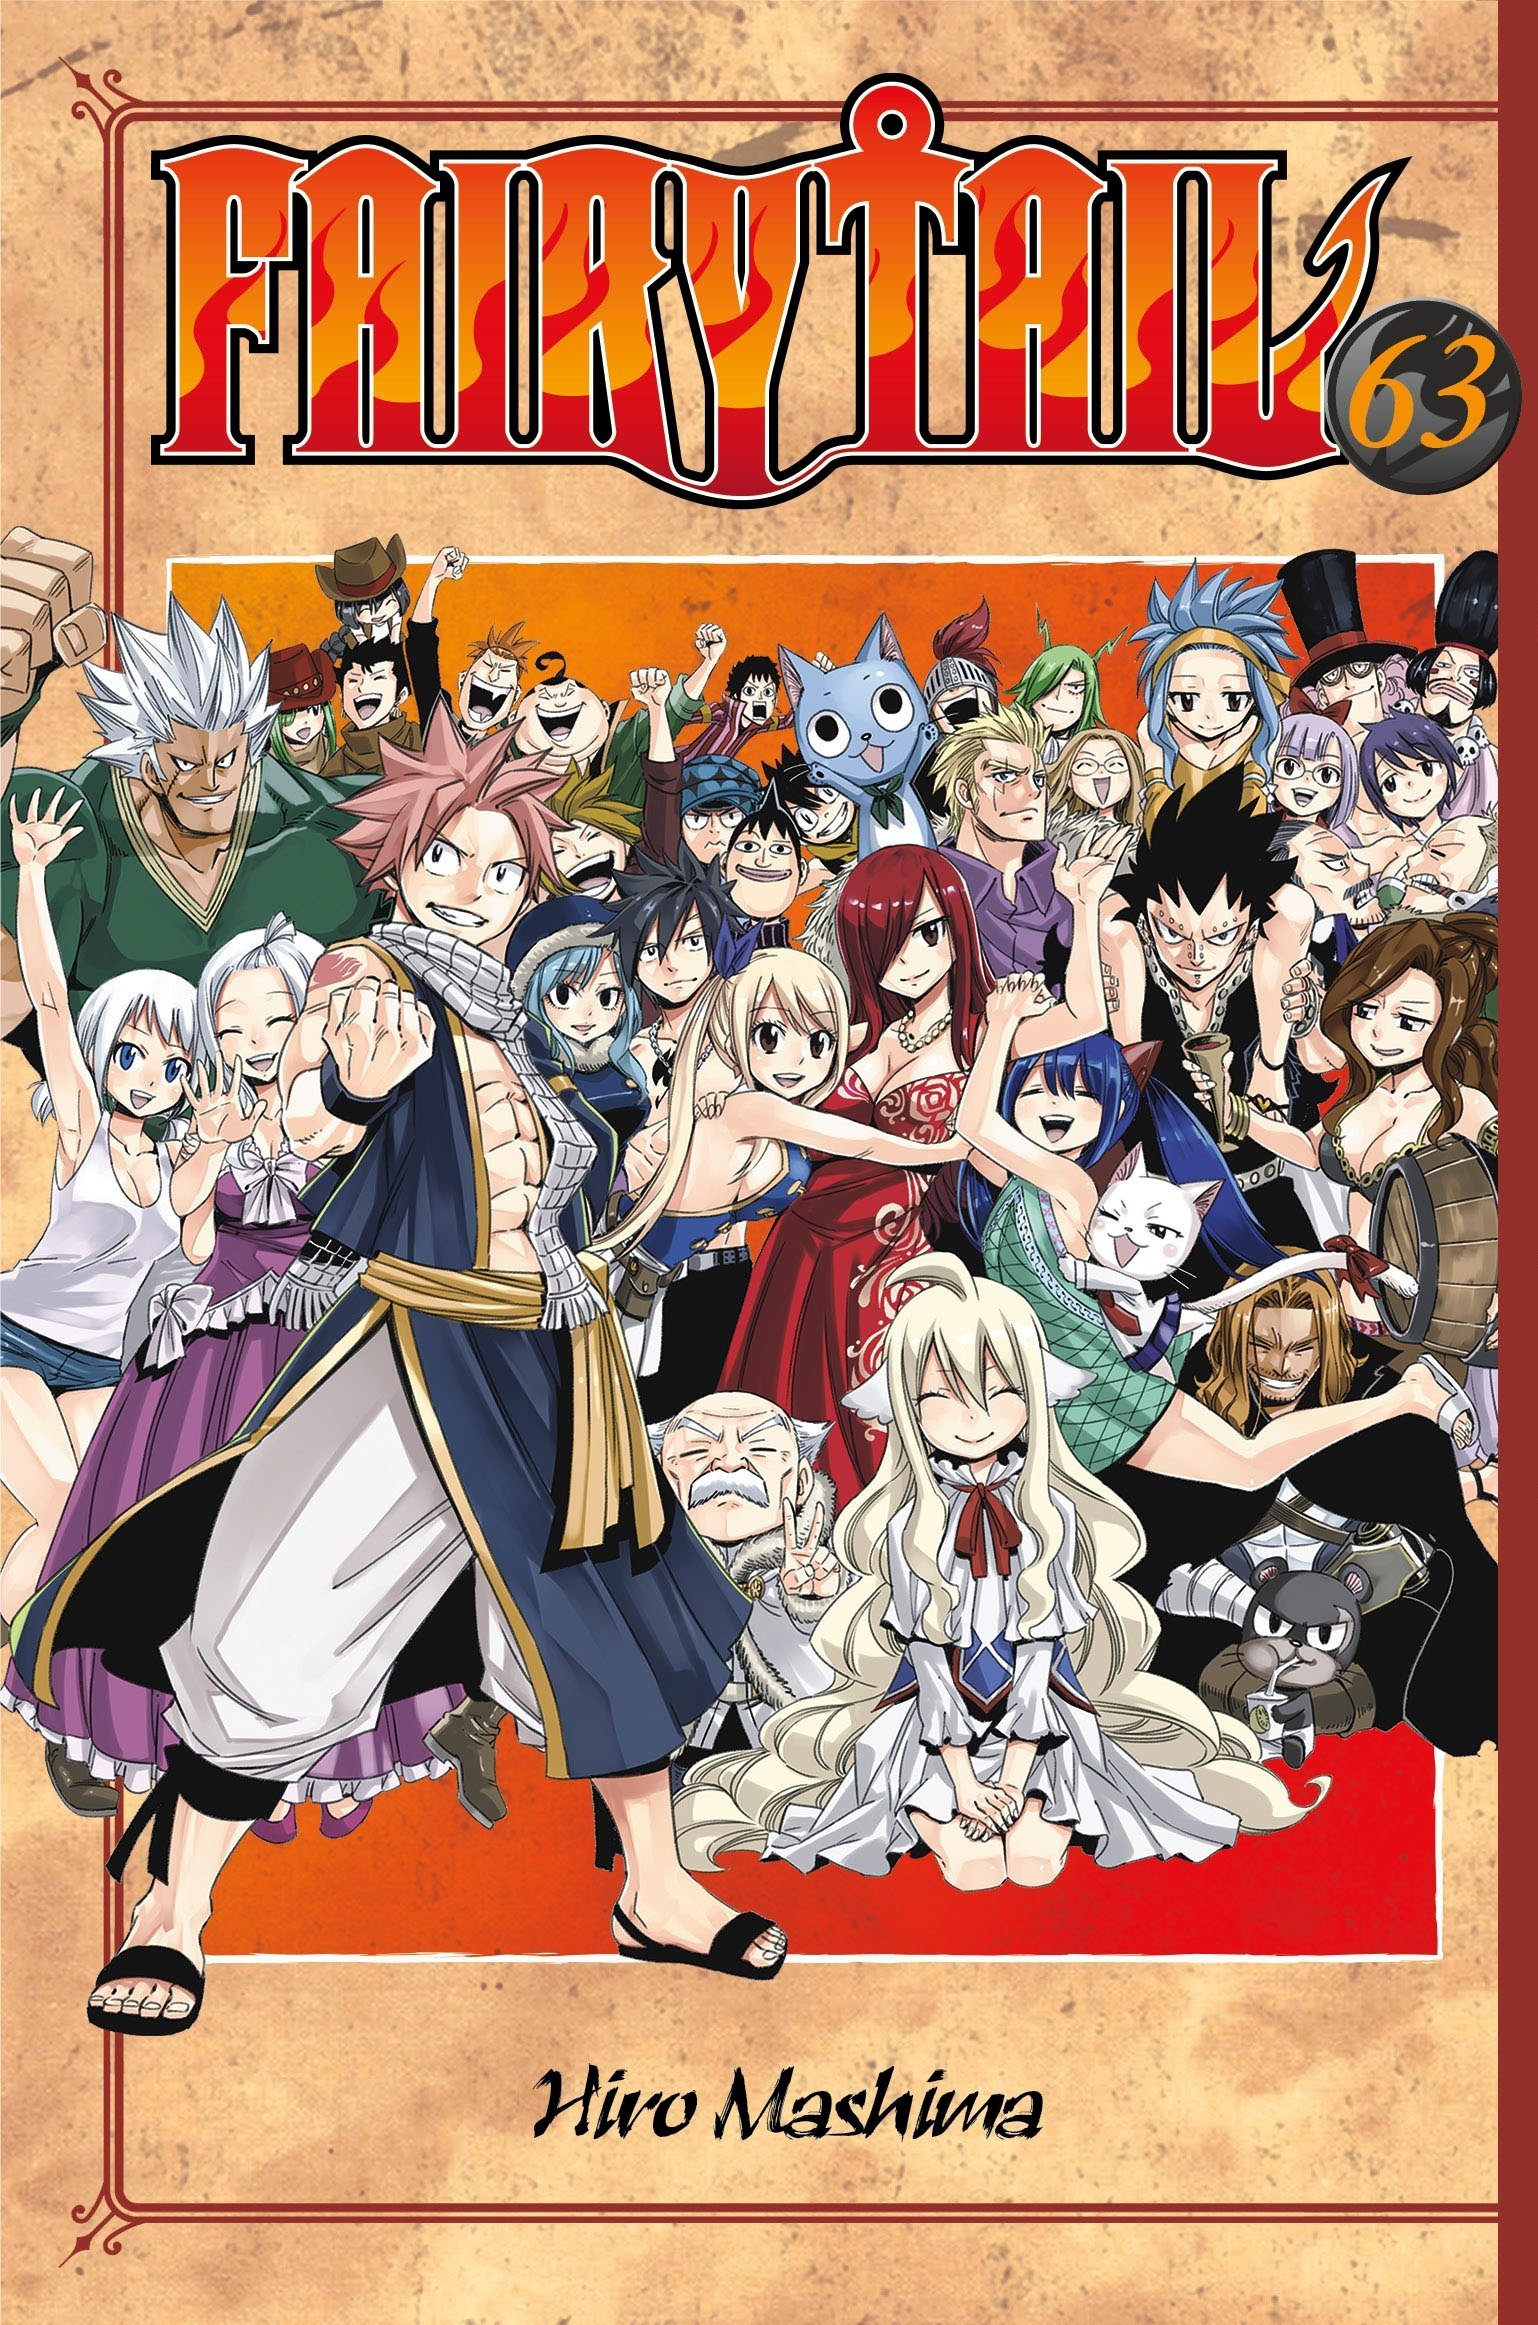 FAIRY TAIL-HOODLUM PC Direct Download [ Crack ]